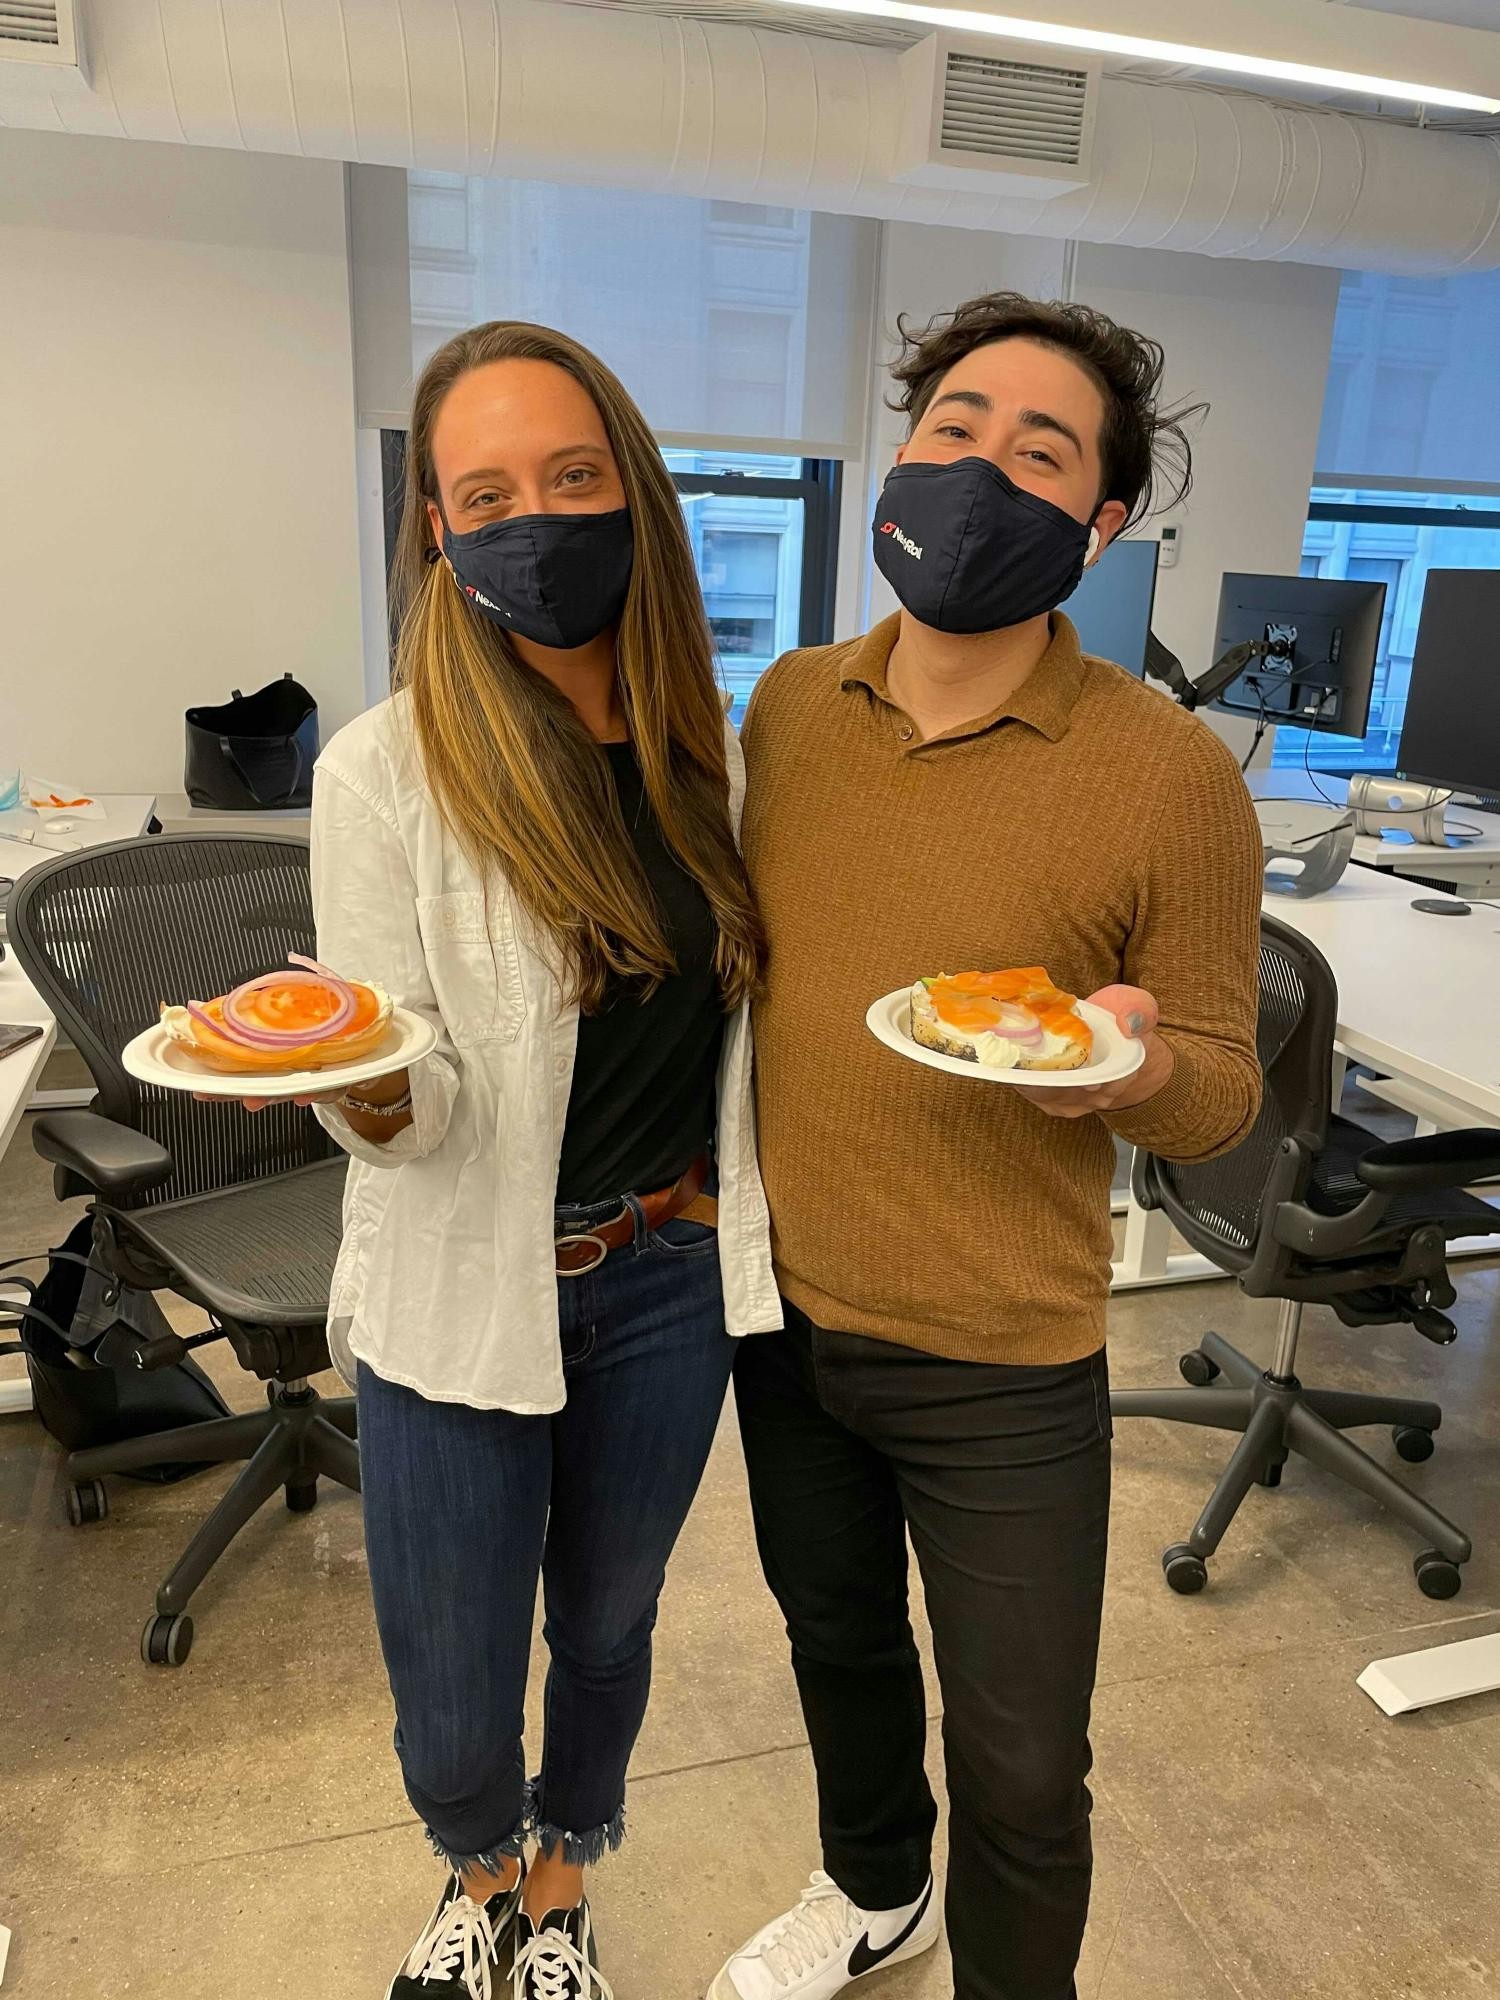 NextRoll's longstanding tradition of Bagel Wednesday lives on in 2022, following the reopening of our New York office.